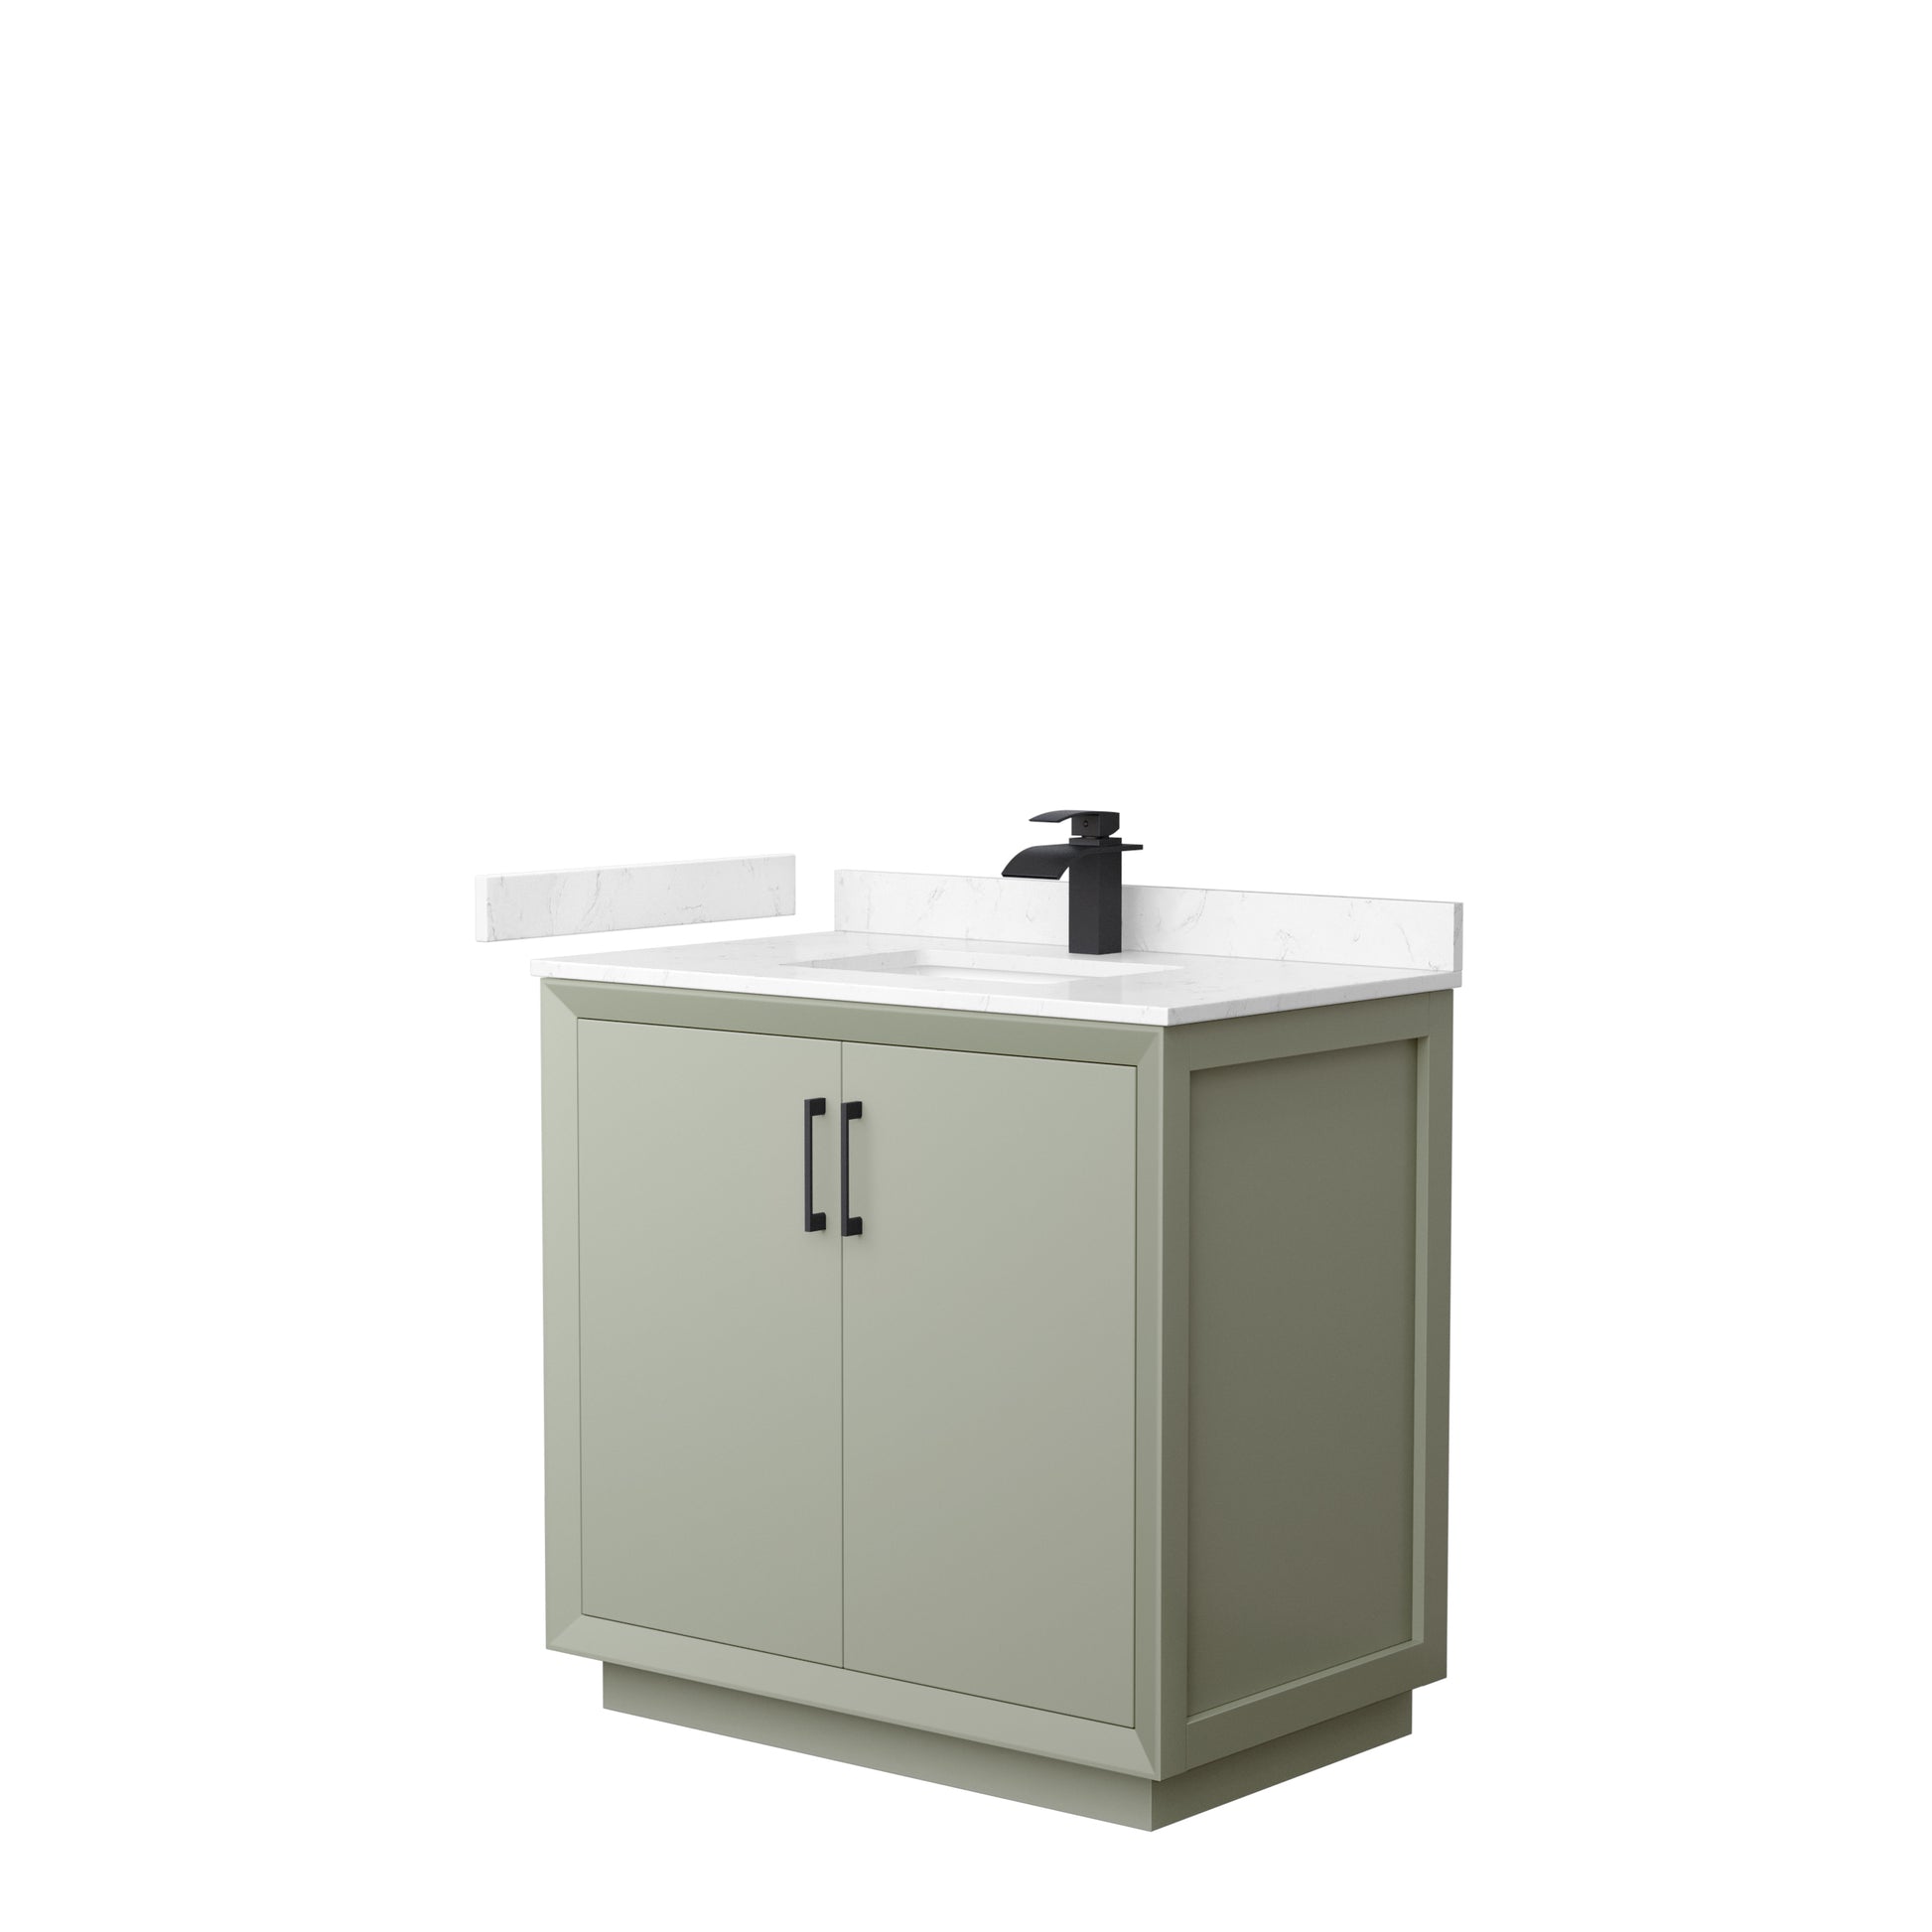 
  
  Strada Single Sink Vanity with Carrara Cultured Marble, Undermount Square Sink, Optional Trim and Mirror
  
